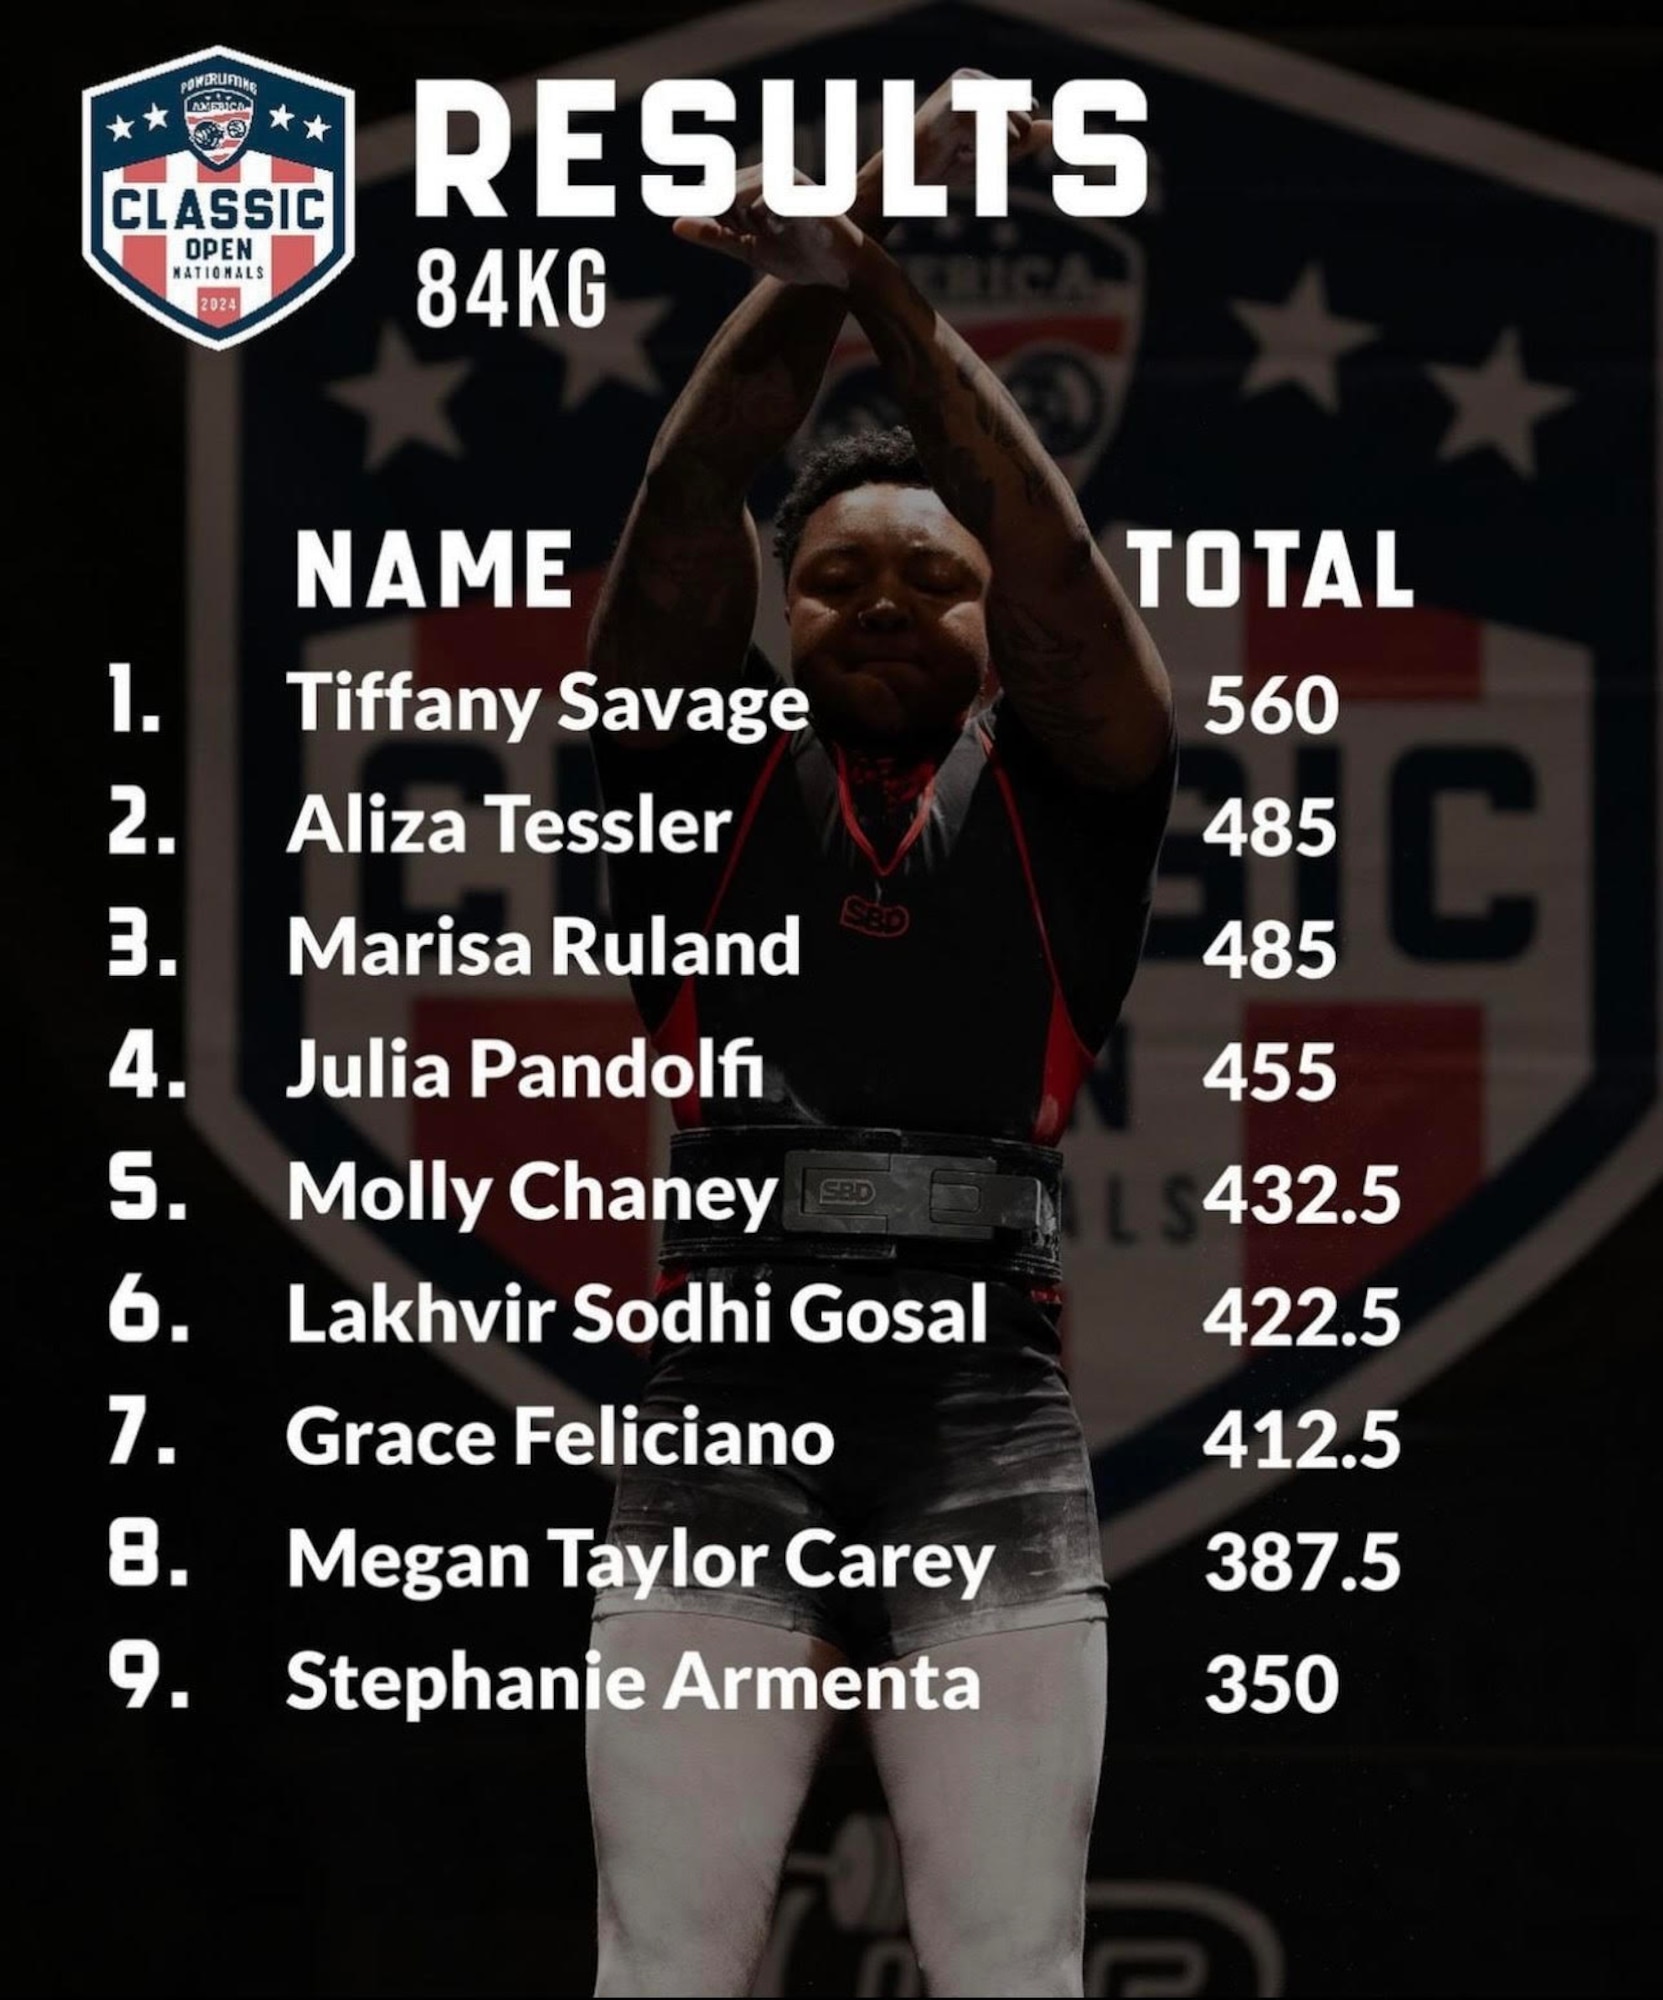 The image shows the leaderboard of women for the 84 KG Women's National Champion of Powerlifting America with Technical Sergeant Tiffany Savage listed in the number one spot, followed by eight others.